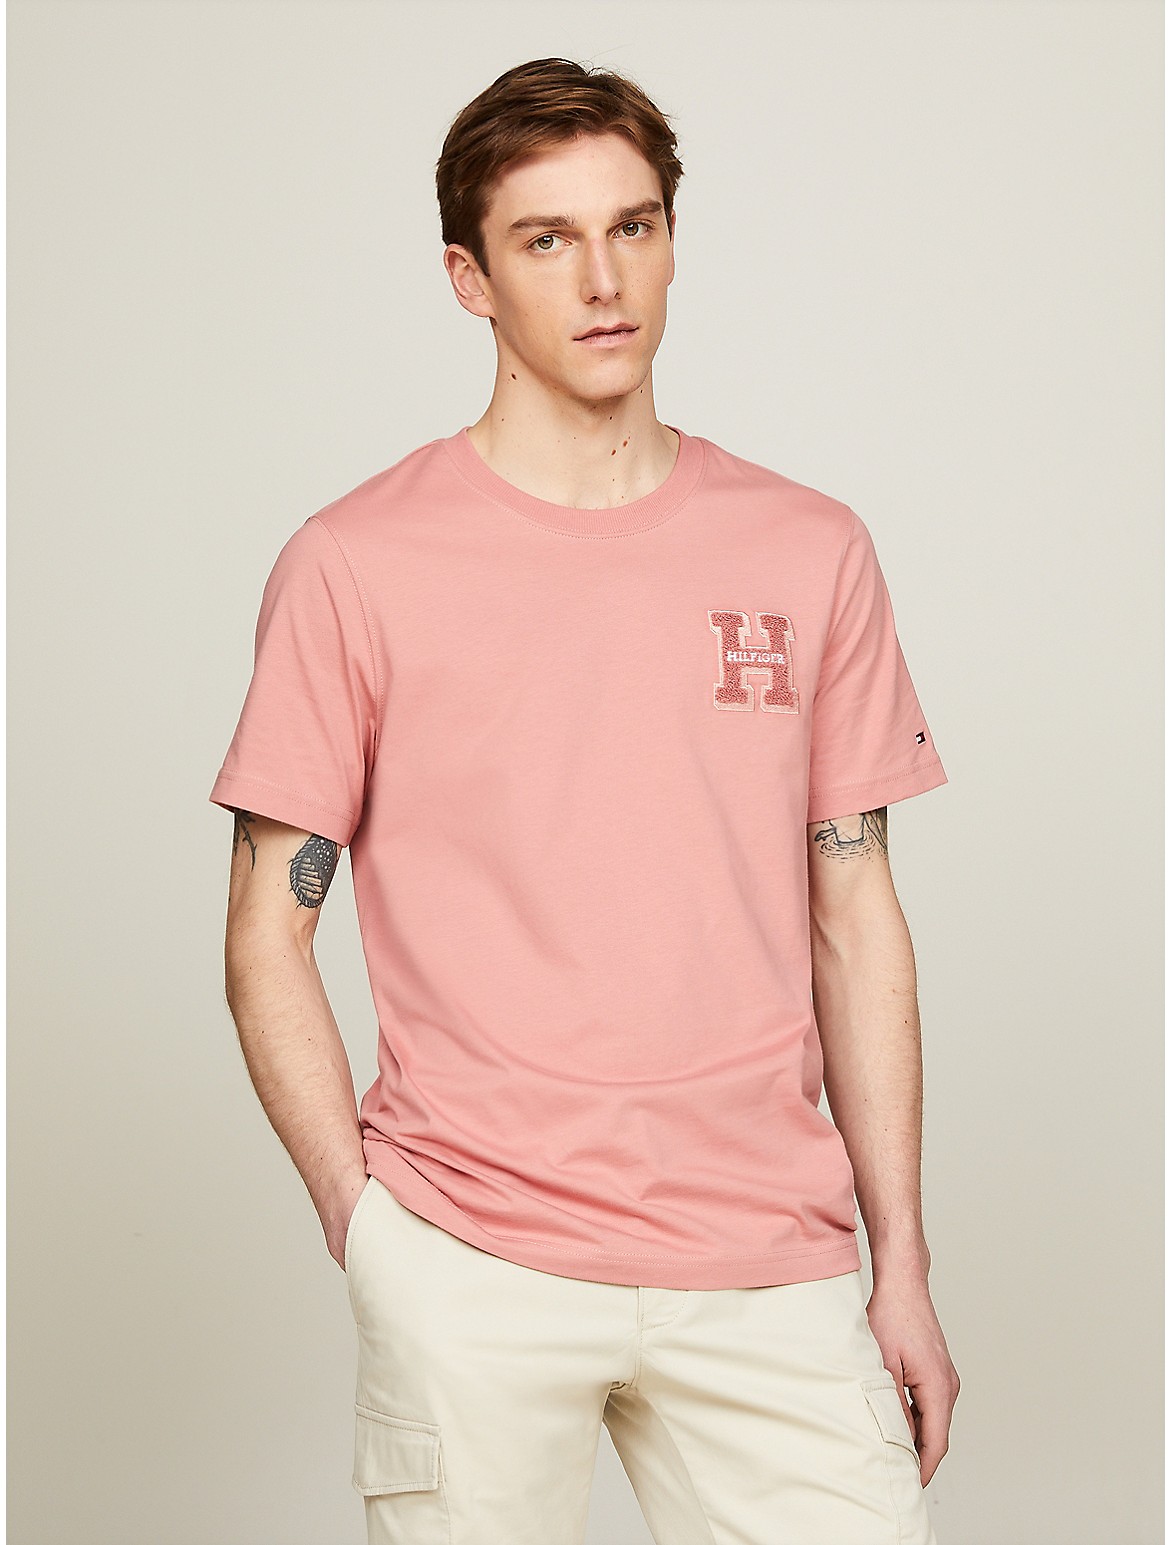 Tommy Hilfiger Men's Embroidered Patch T-Shirt - Pink - L